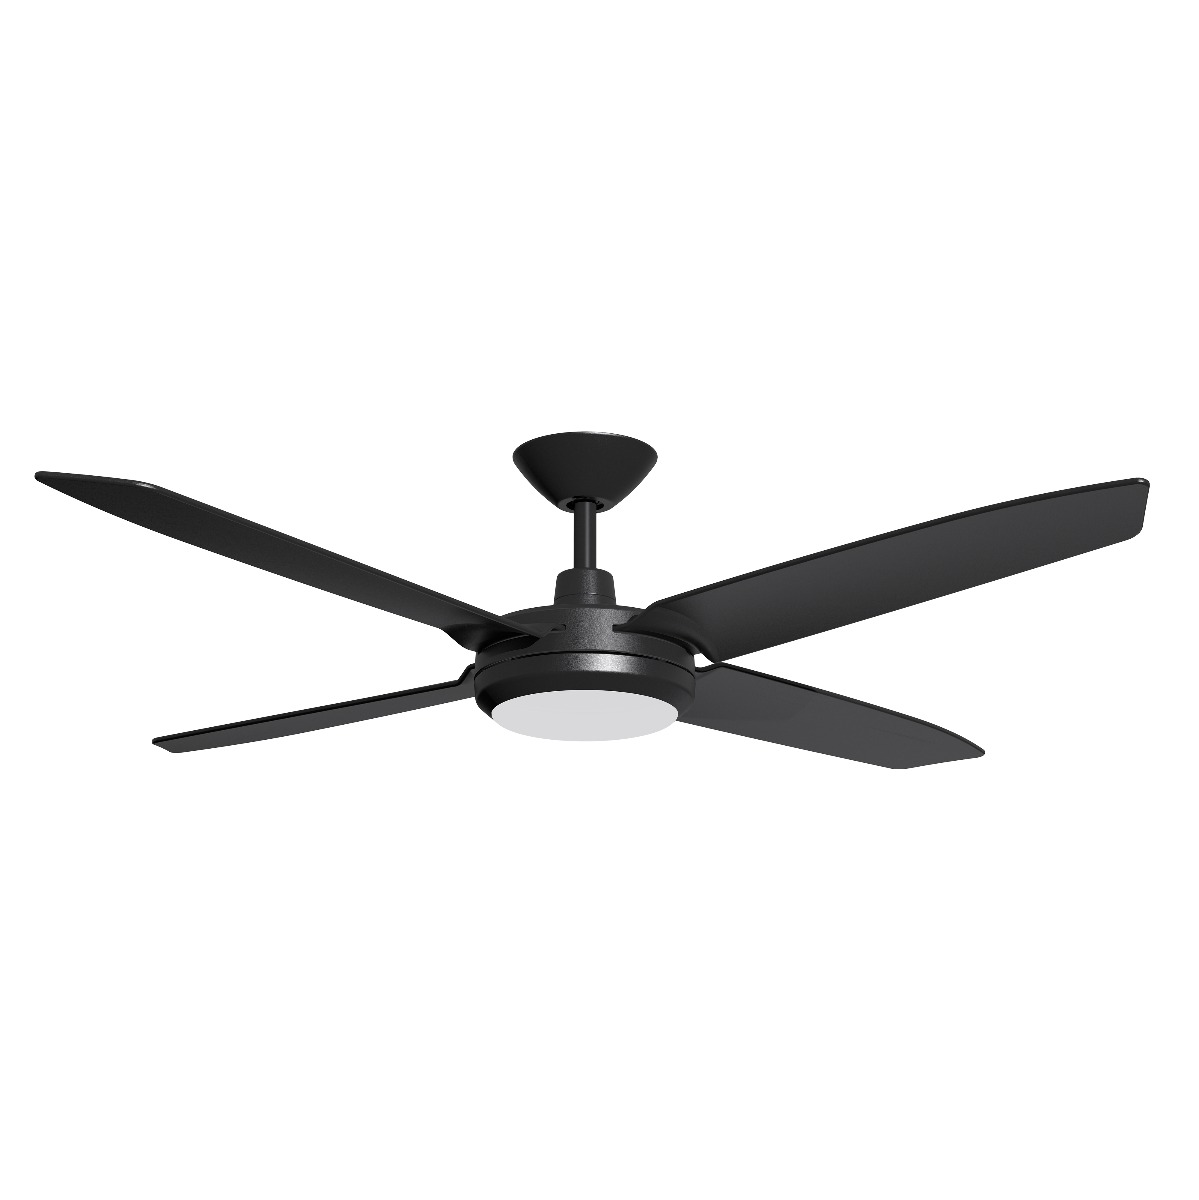 Airborne Enviro DC Ceiling Fan with CCT LED Light and Remote - Black 60"